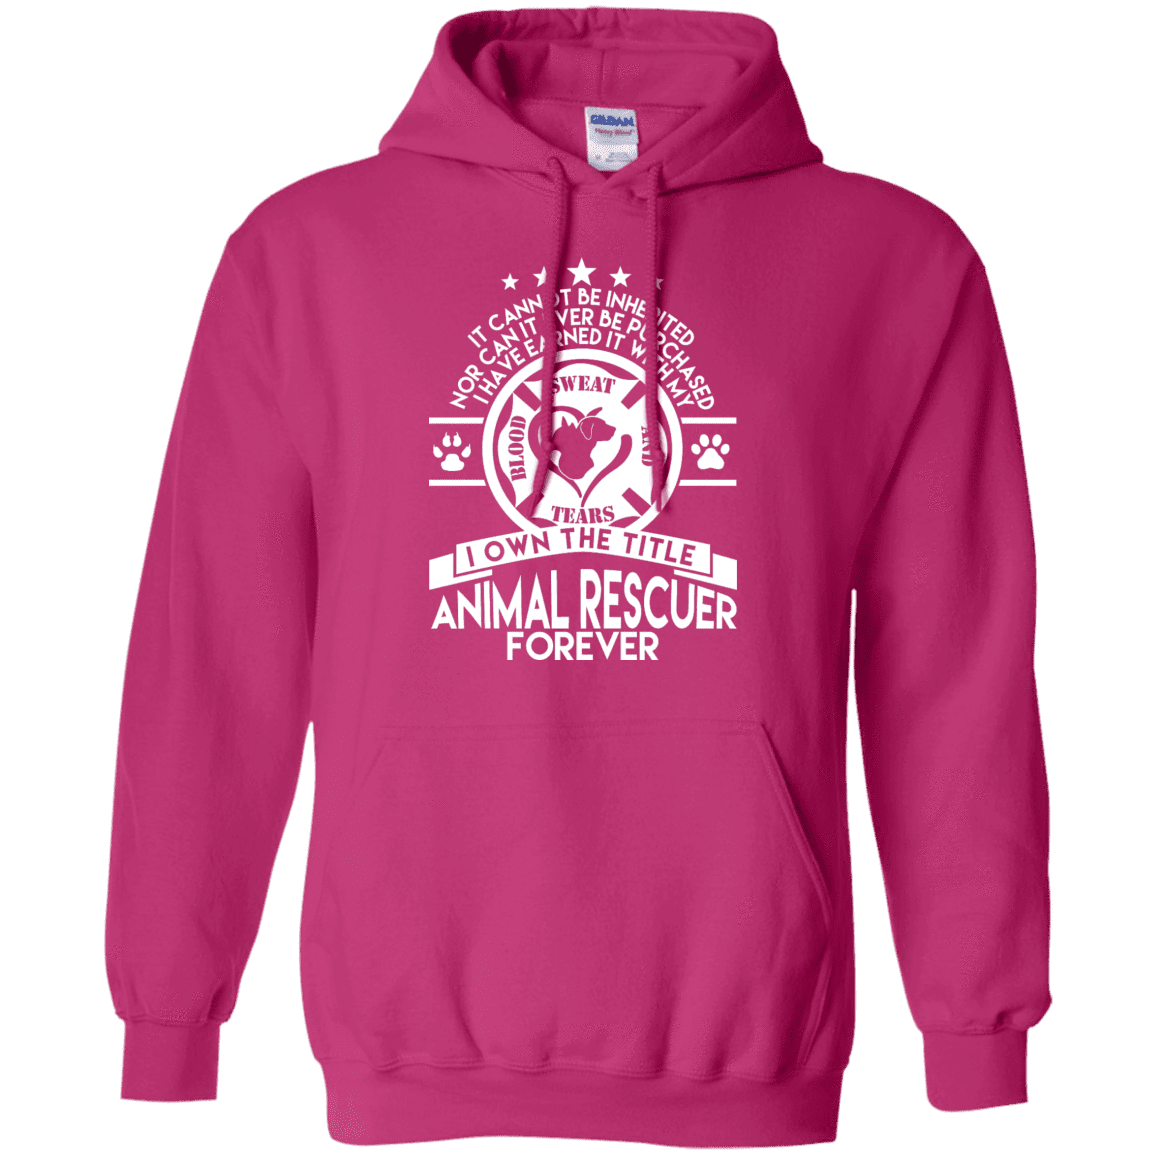 Animal Rescuer Forever - Hoodie.